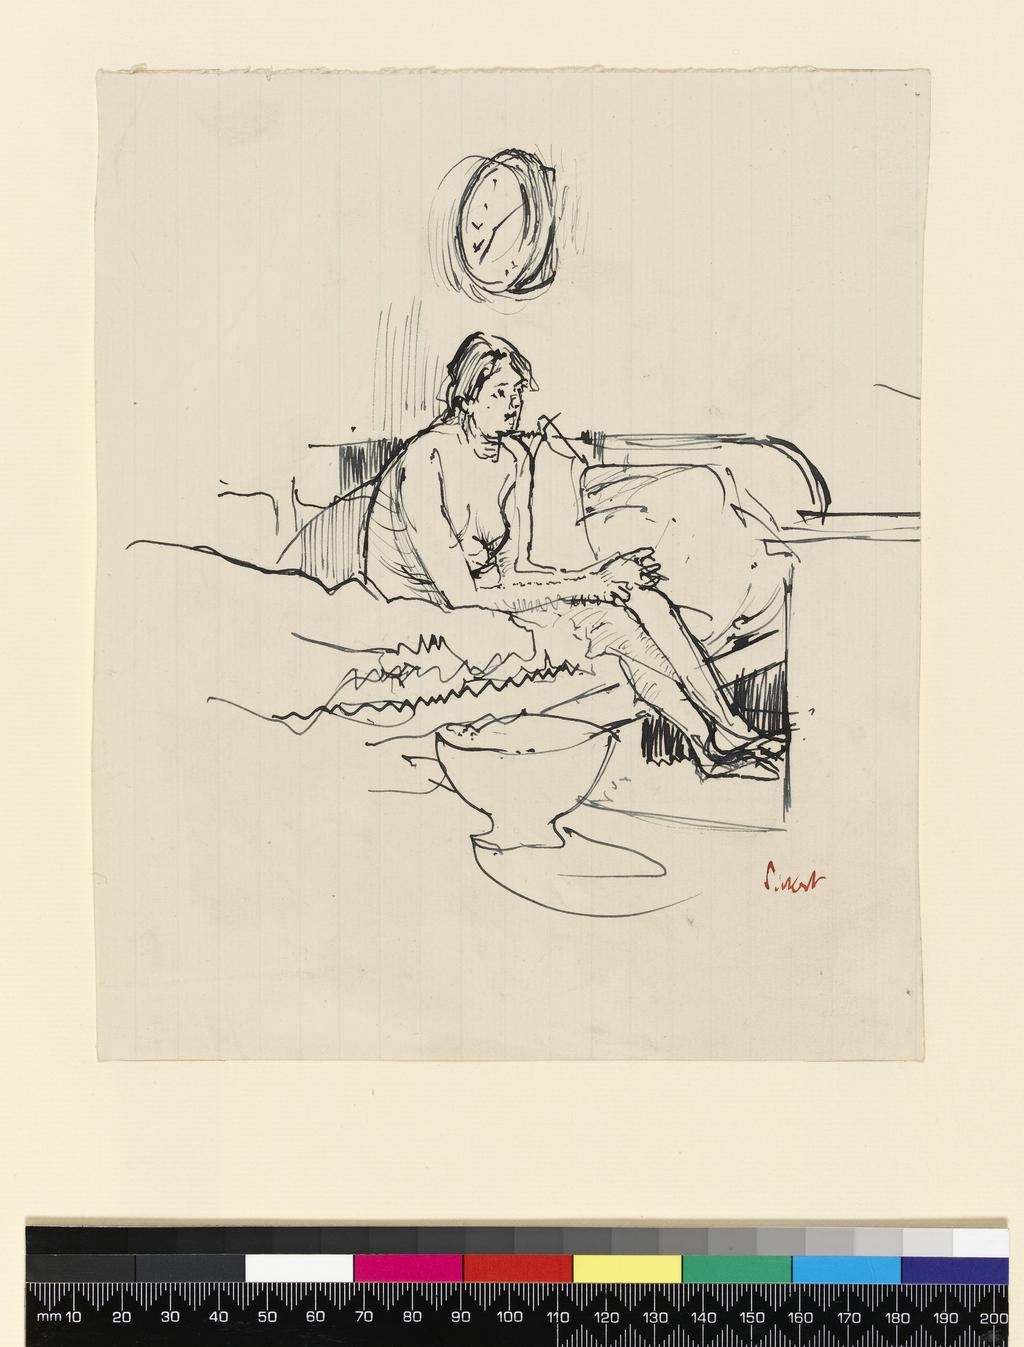 An image of Girl Seated on a Bed. Sickert, Walter Richard. Pen and blue ink on paper, height 204 mm, width 171 mm.